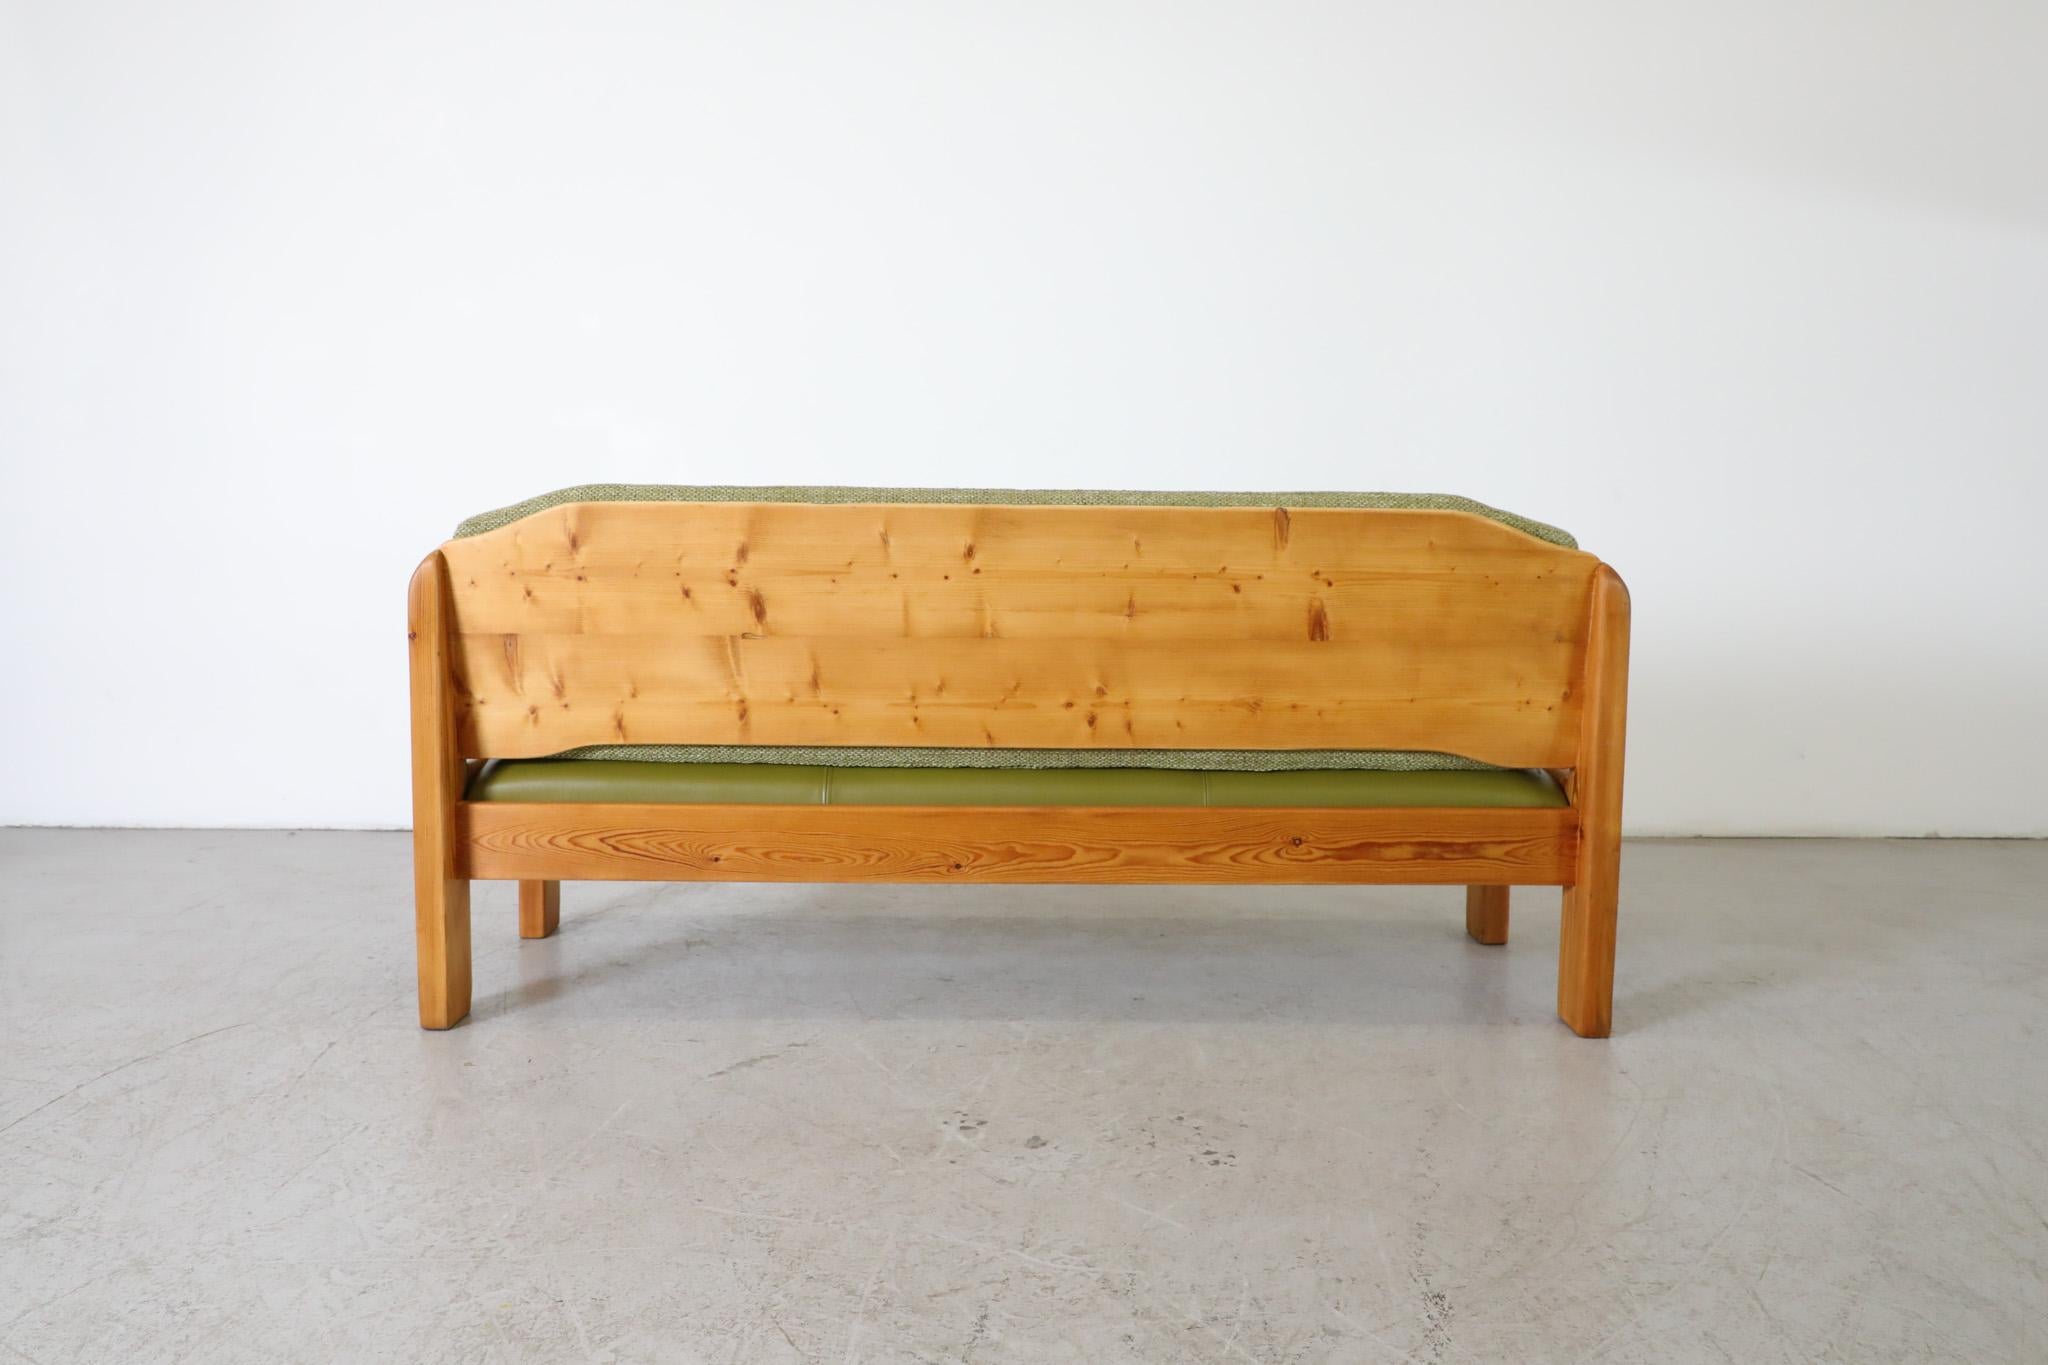 Fabric Ate van Apeldoorn Inspired Pine Bench with Green Cushions & Hand Carved Details For Sale